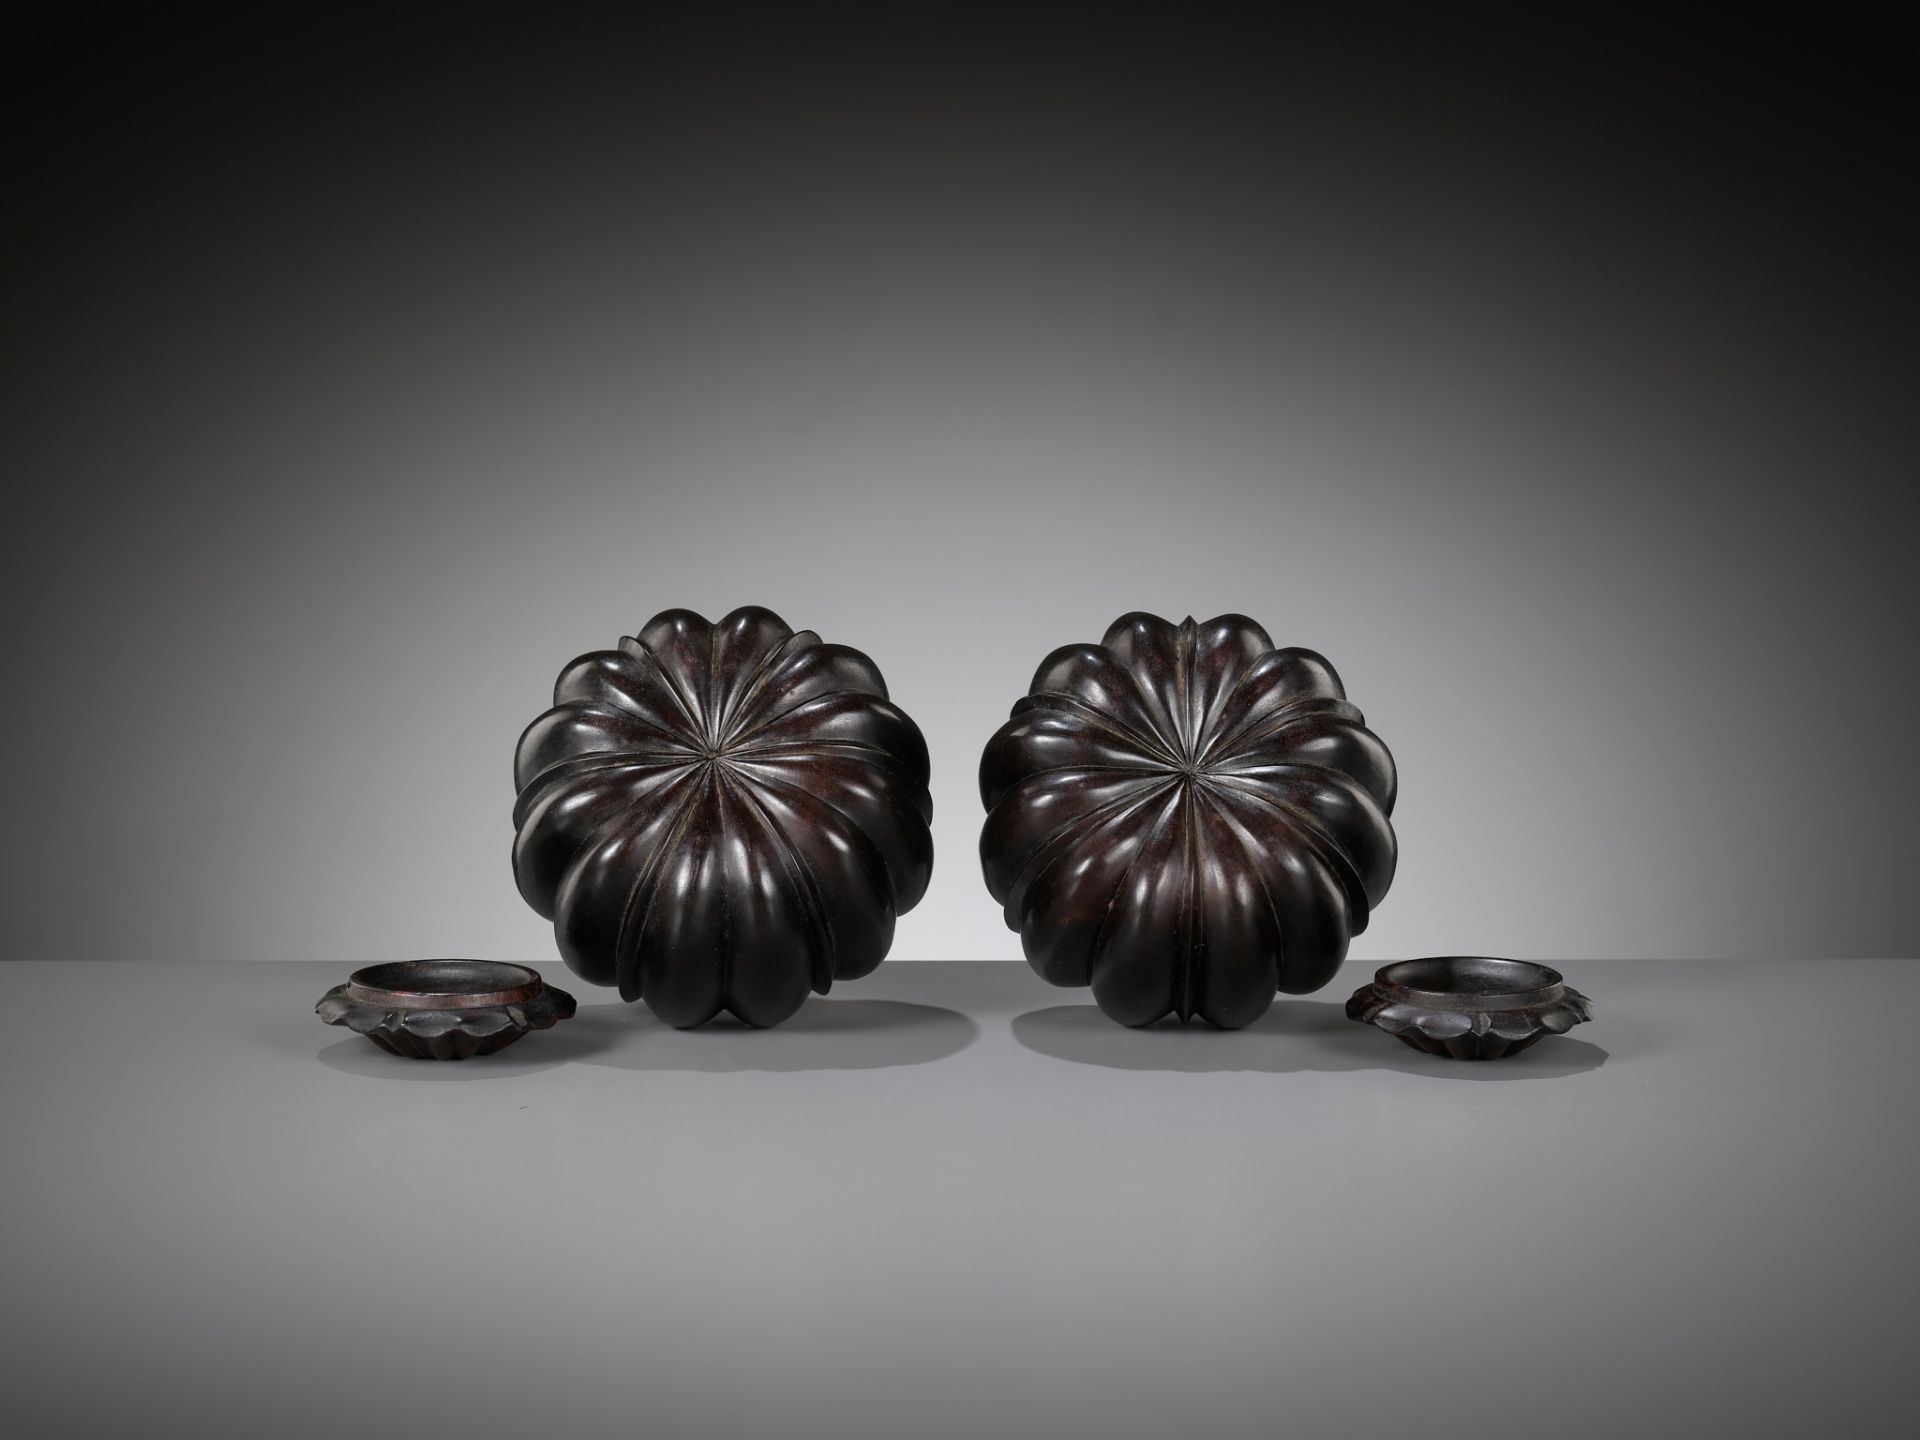 A PAIR OF ZITAN WEIQI COUNTER CONTAINERS, WEIQIZIHE, 17TH-18TH CENTURY - Image 9 of 10